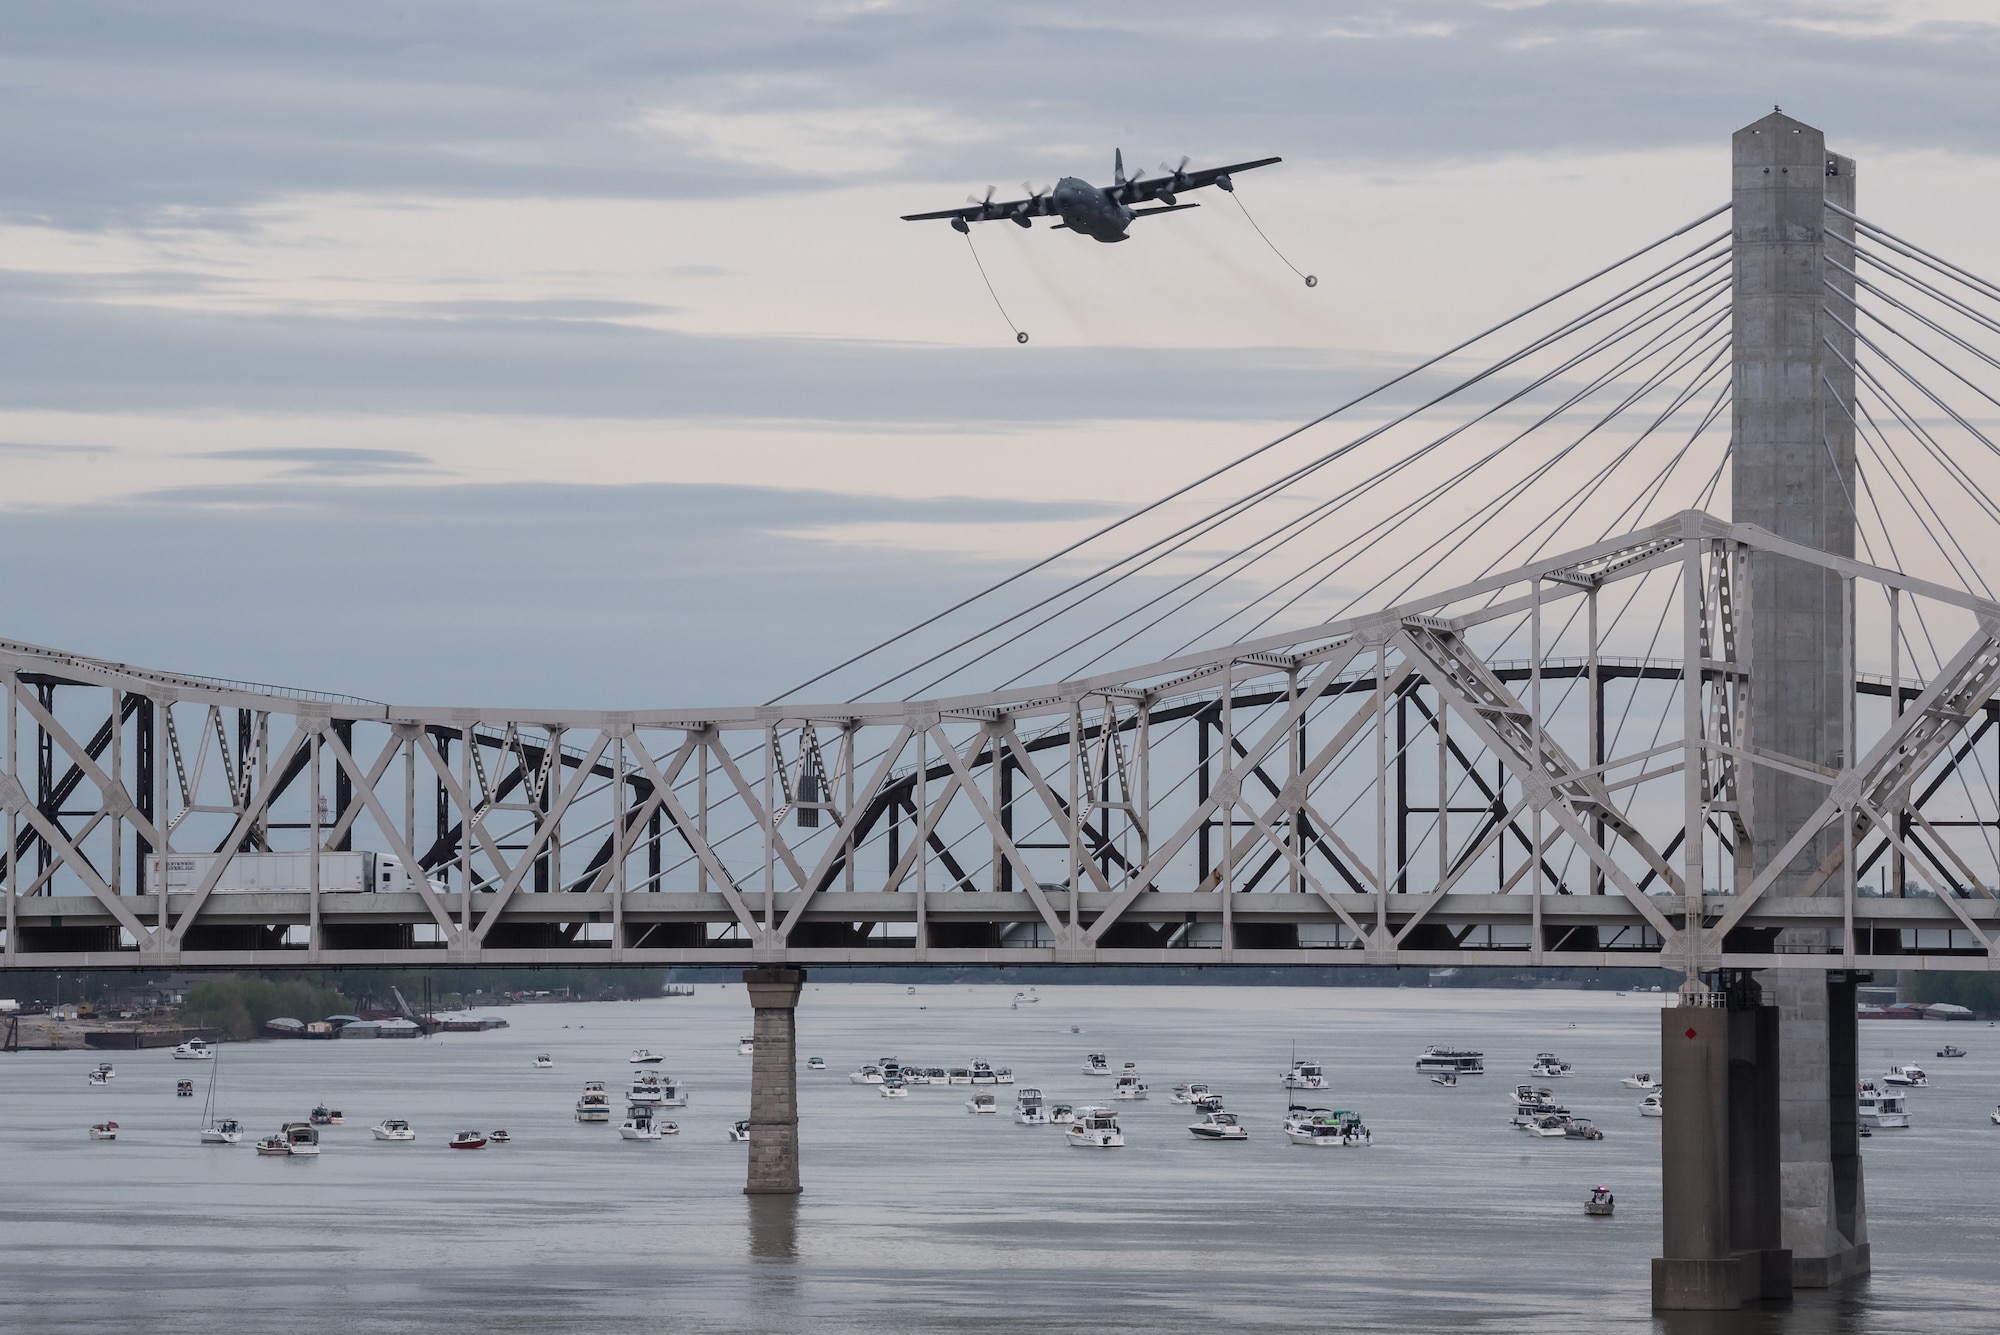 A U.S. Air Force HC-130 Hercules aircraft from Patrick Air Force Base Florida, deploys its refueling drogues over the Ohio River during the Thunder Over Louisville airshow in Louisville, Ky., April 13, 2019. The Kentucky Air National Guard once again served as the base of operations for military aircraft participating in the annual event, which has grown to become one of the largest single-day air shows in North America. (U.S. Air National Guard photo by Dale Greer)